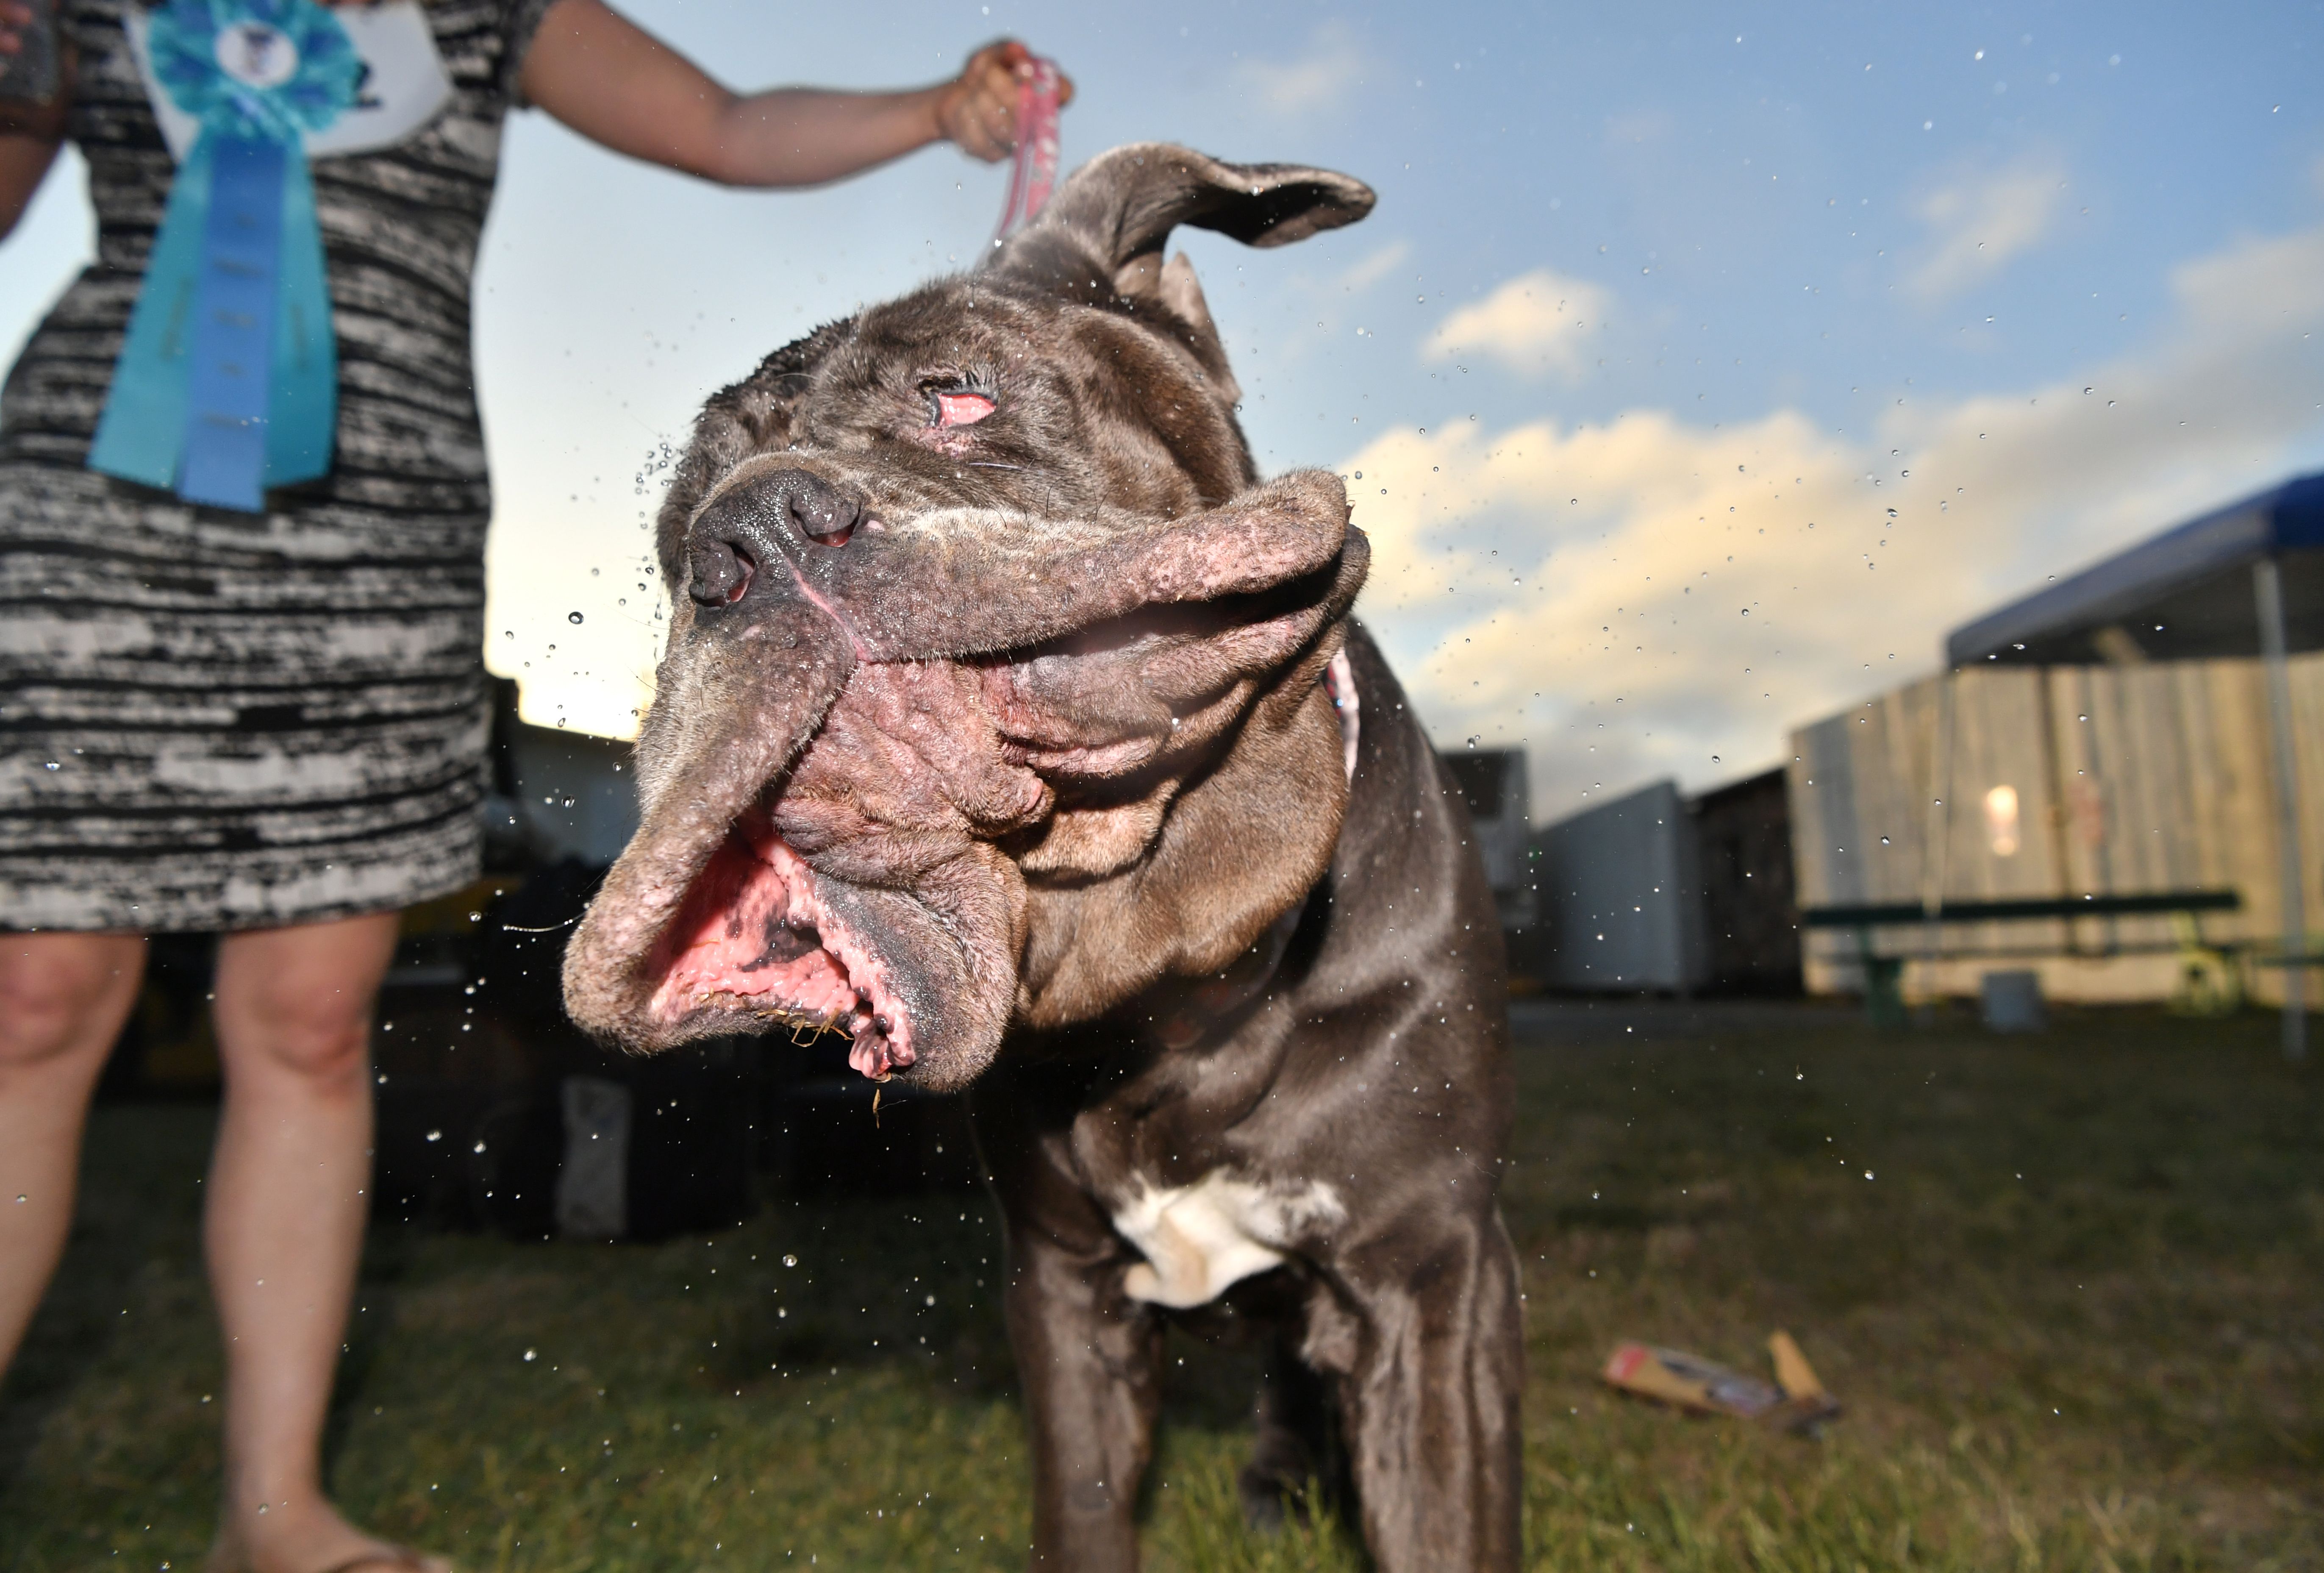 Martha, a Neapolitan Mastiff, shakes water off her head after winning this year's World's Ugliest Dog Competition in Petaluma, California on June 23, 2017. T